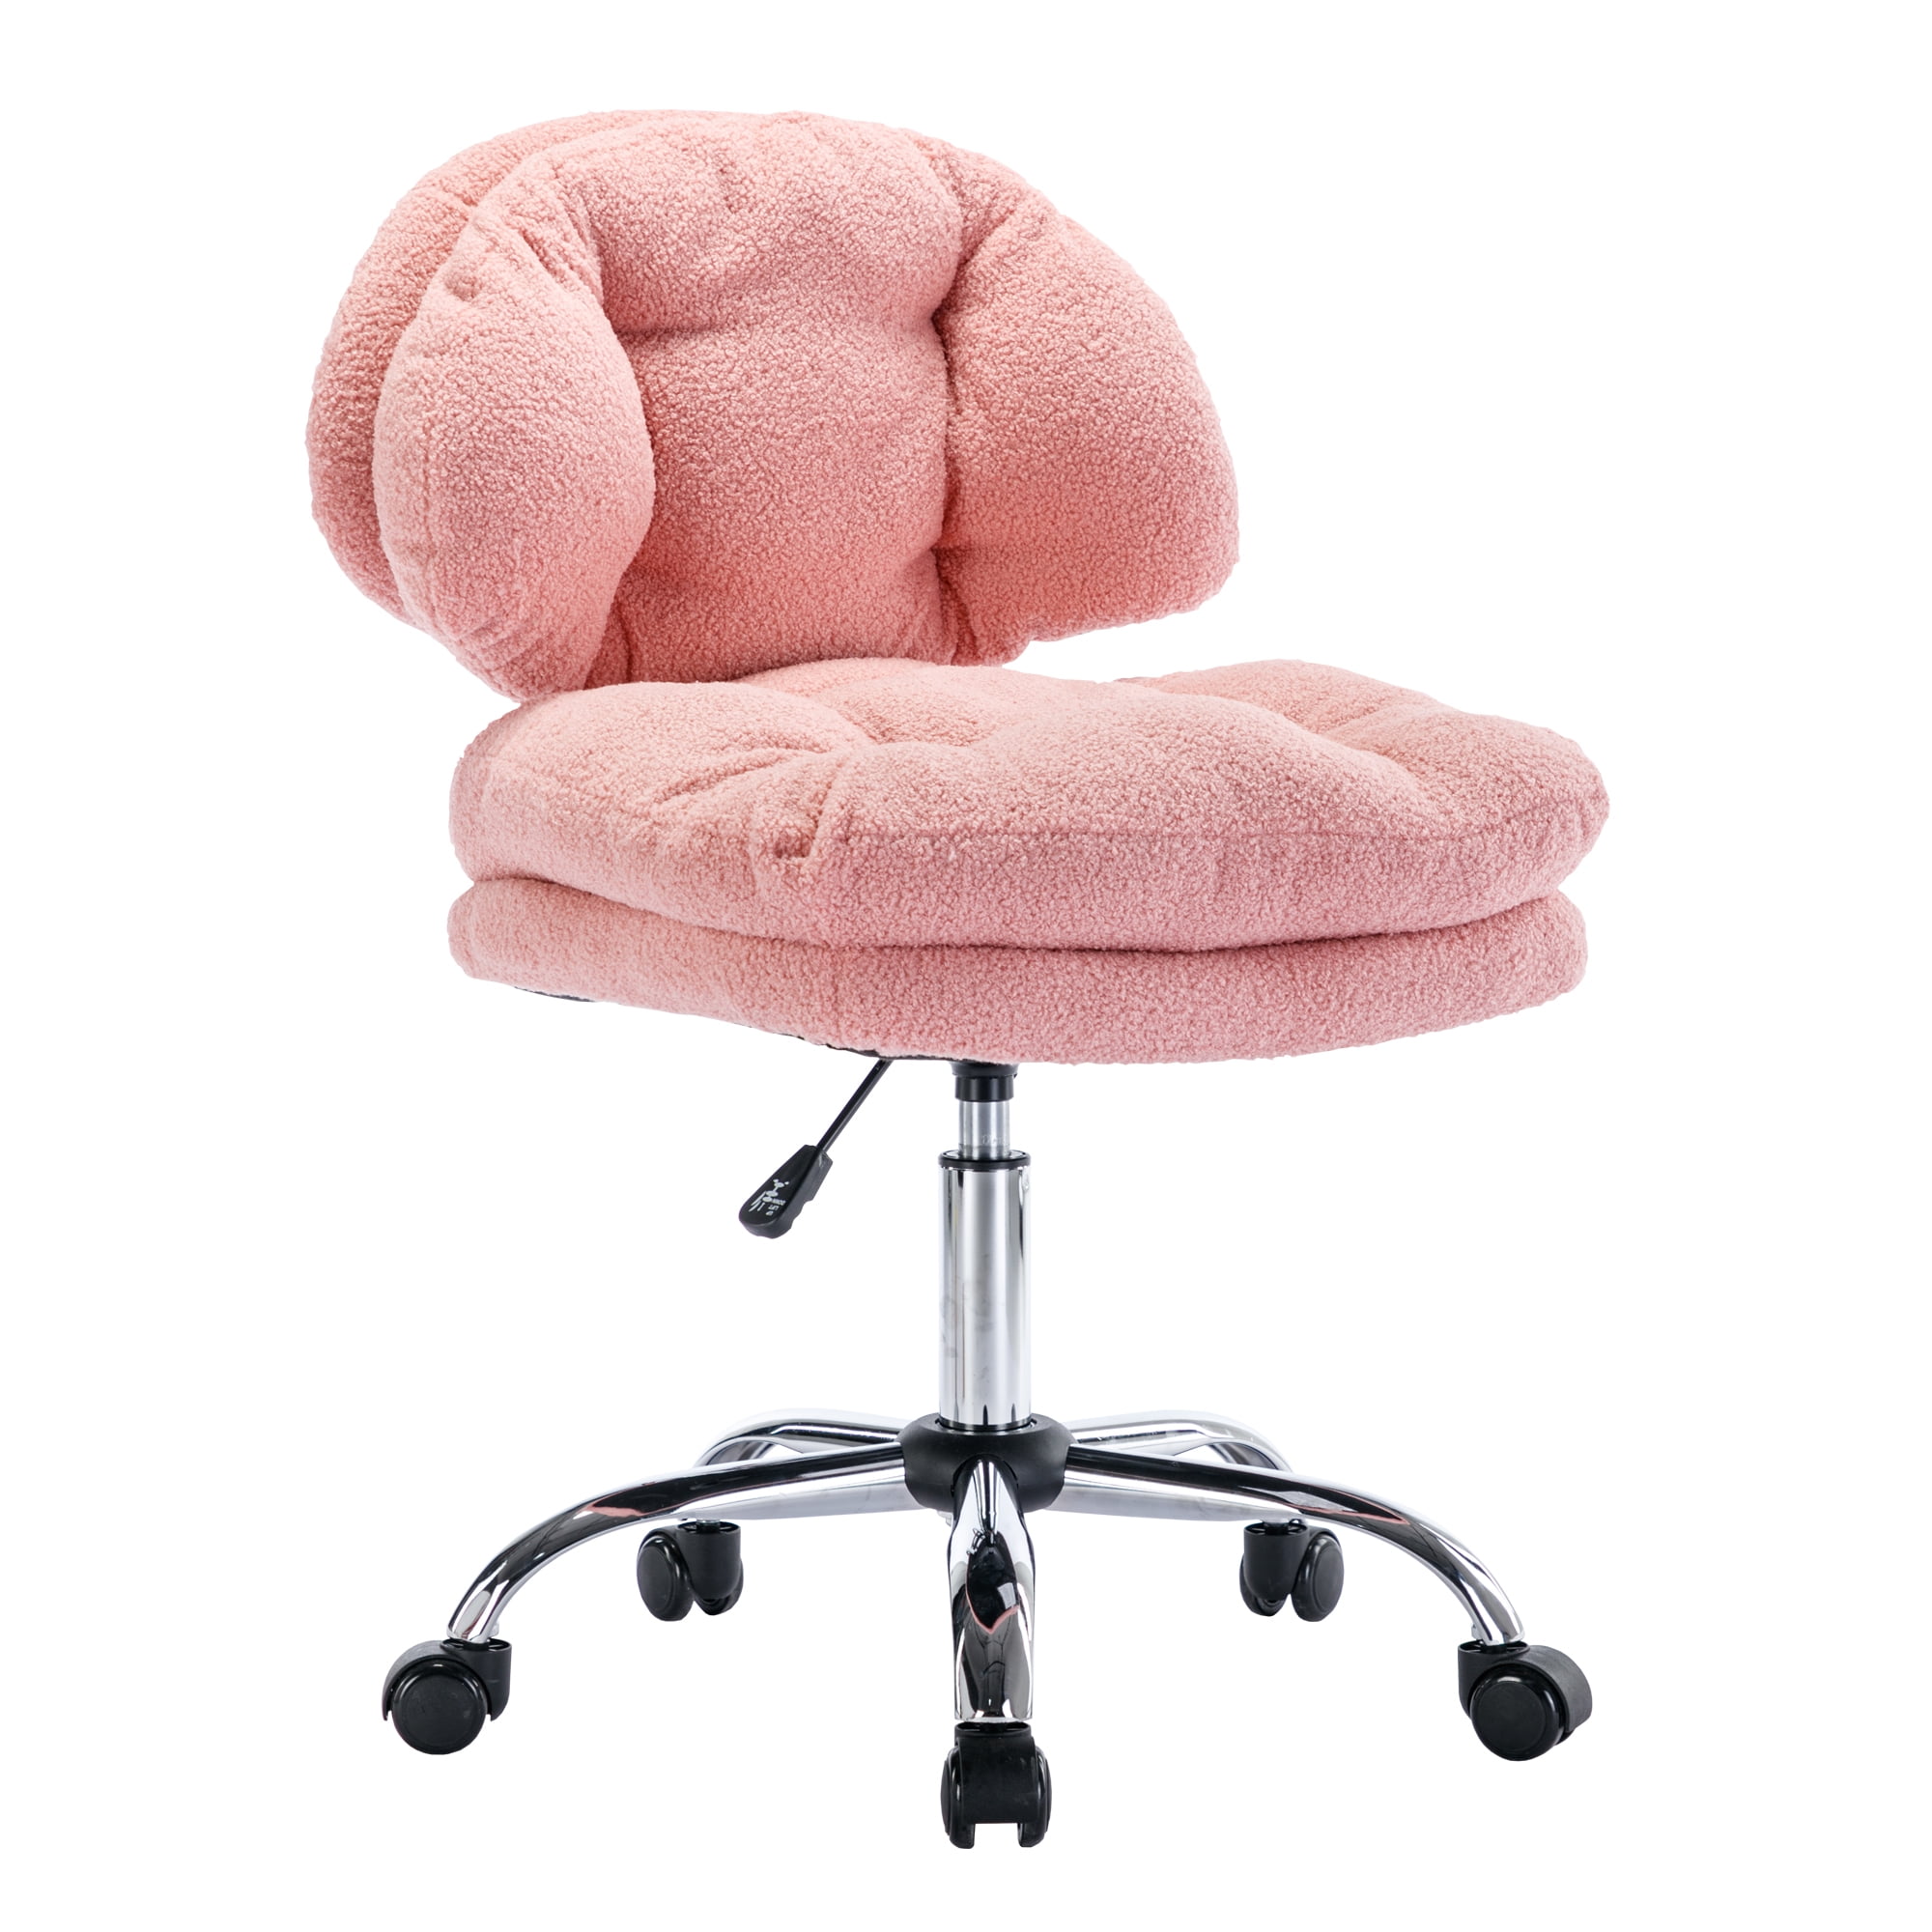 Dropship Pink Velvet Material. Home Computer Chair Office Chair Adjustable  360 °Swivel Cushion Chair With Black Foot Swivel Chair Makeup Chair Study  Desk Chair. No WheelsW115167384 to Sell Online at a Lower